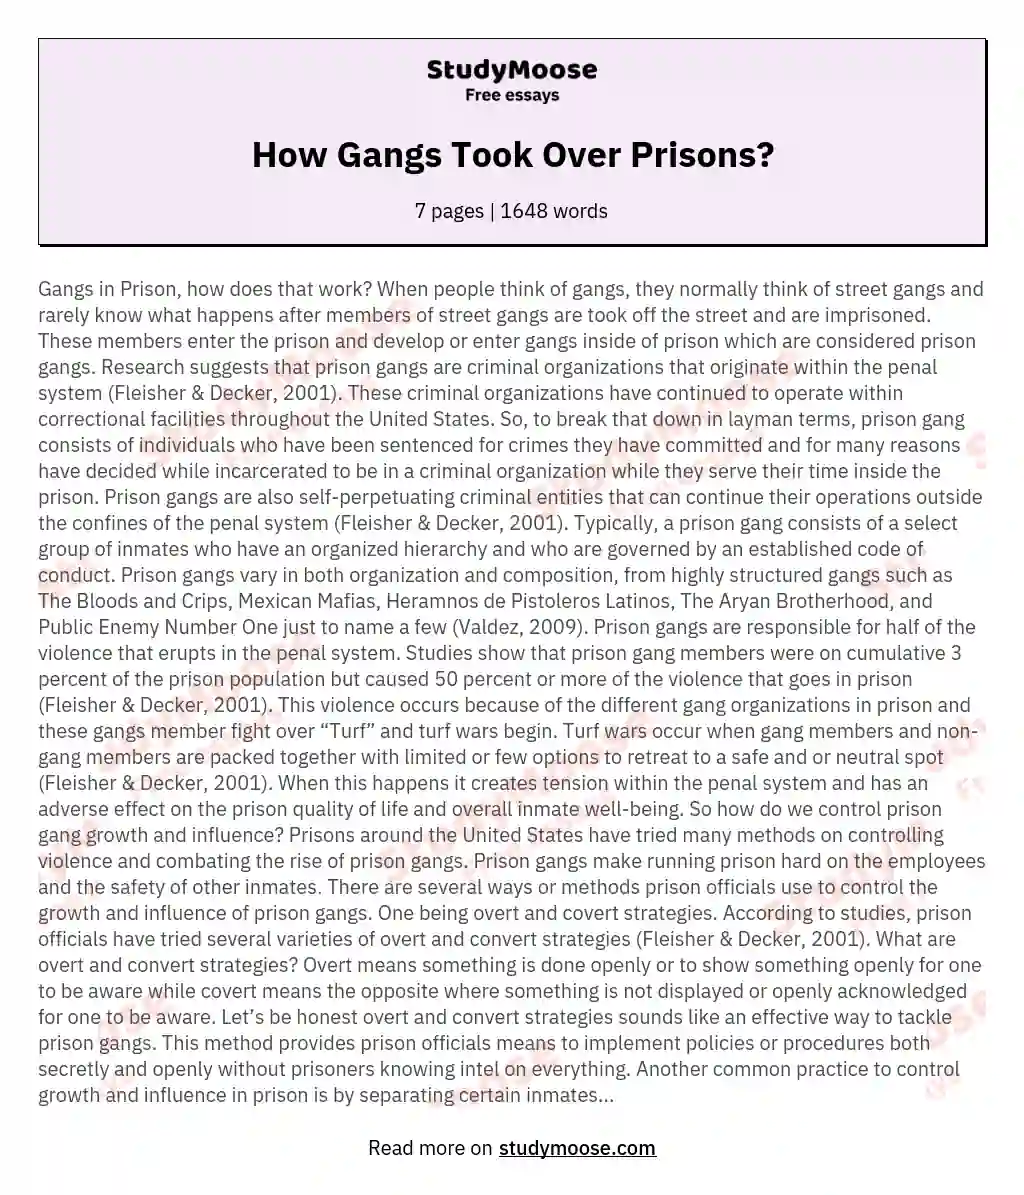 How Gangs Took Over Prisons? essay